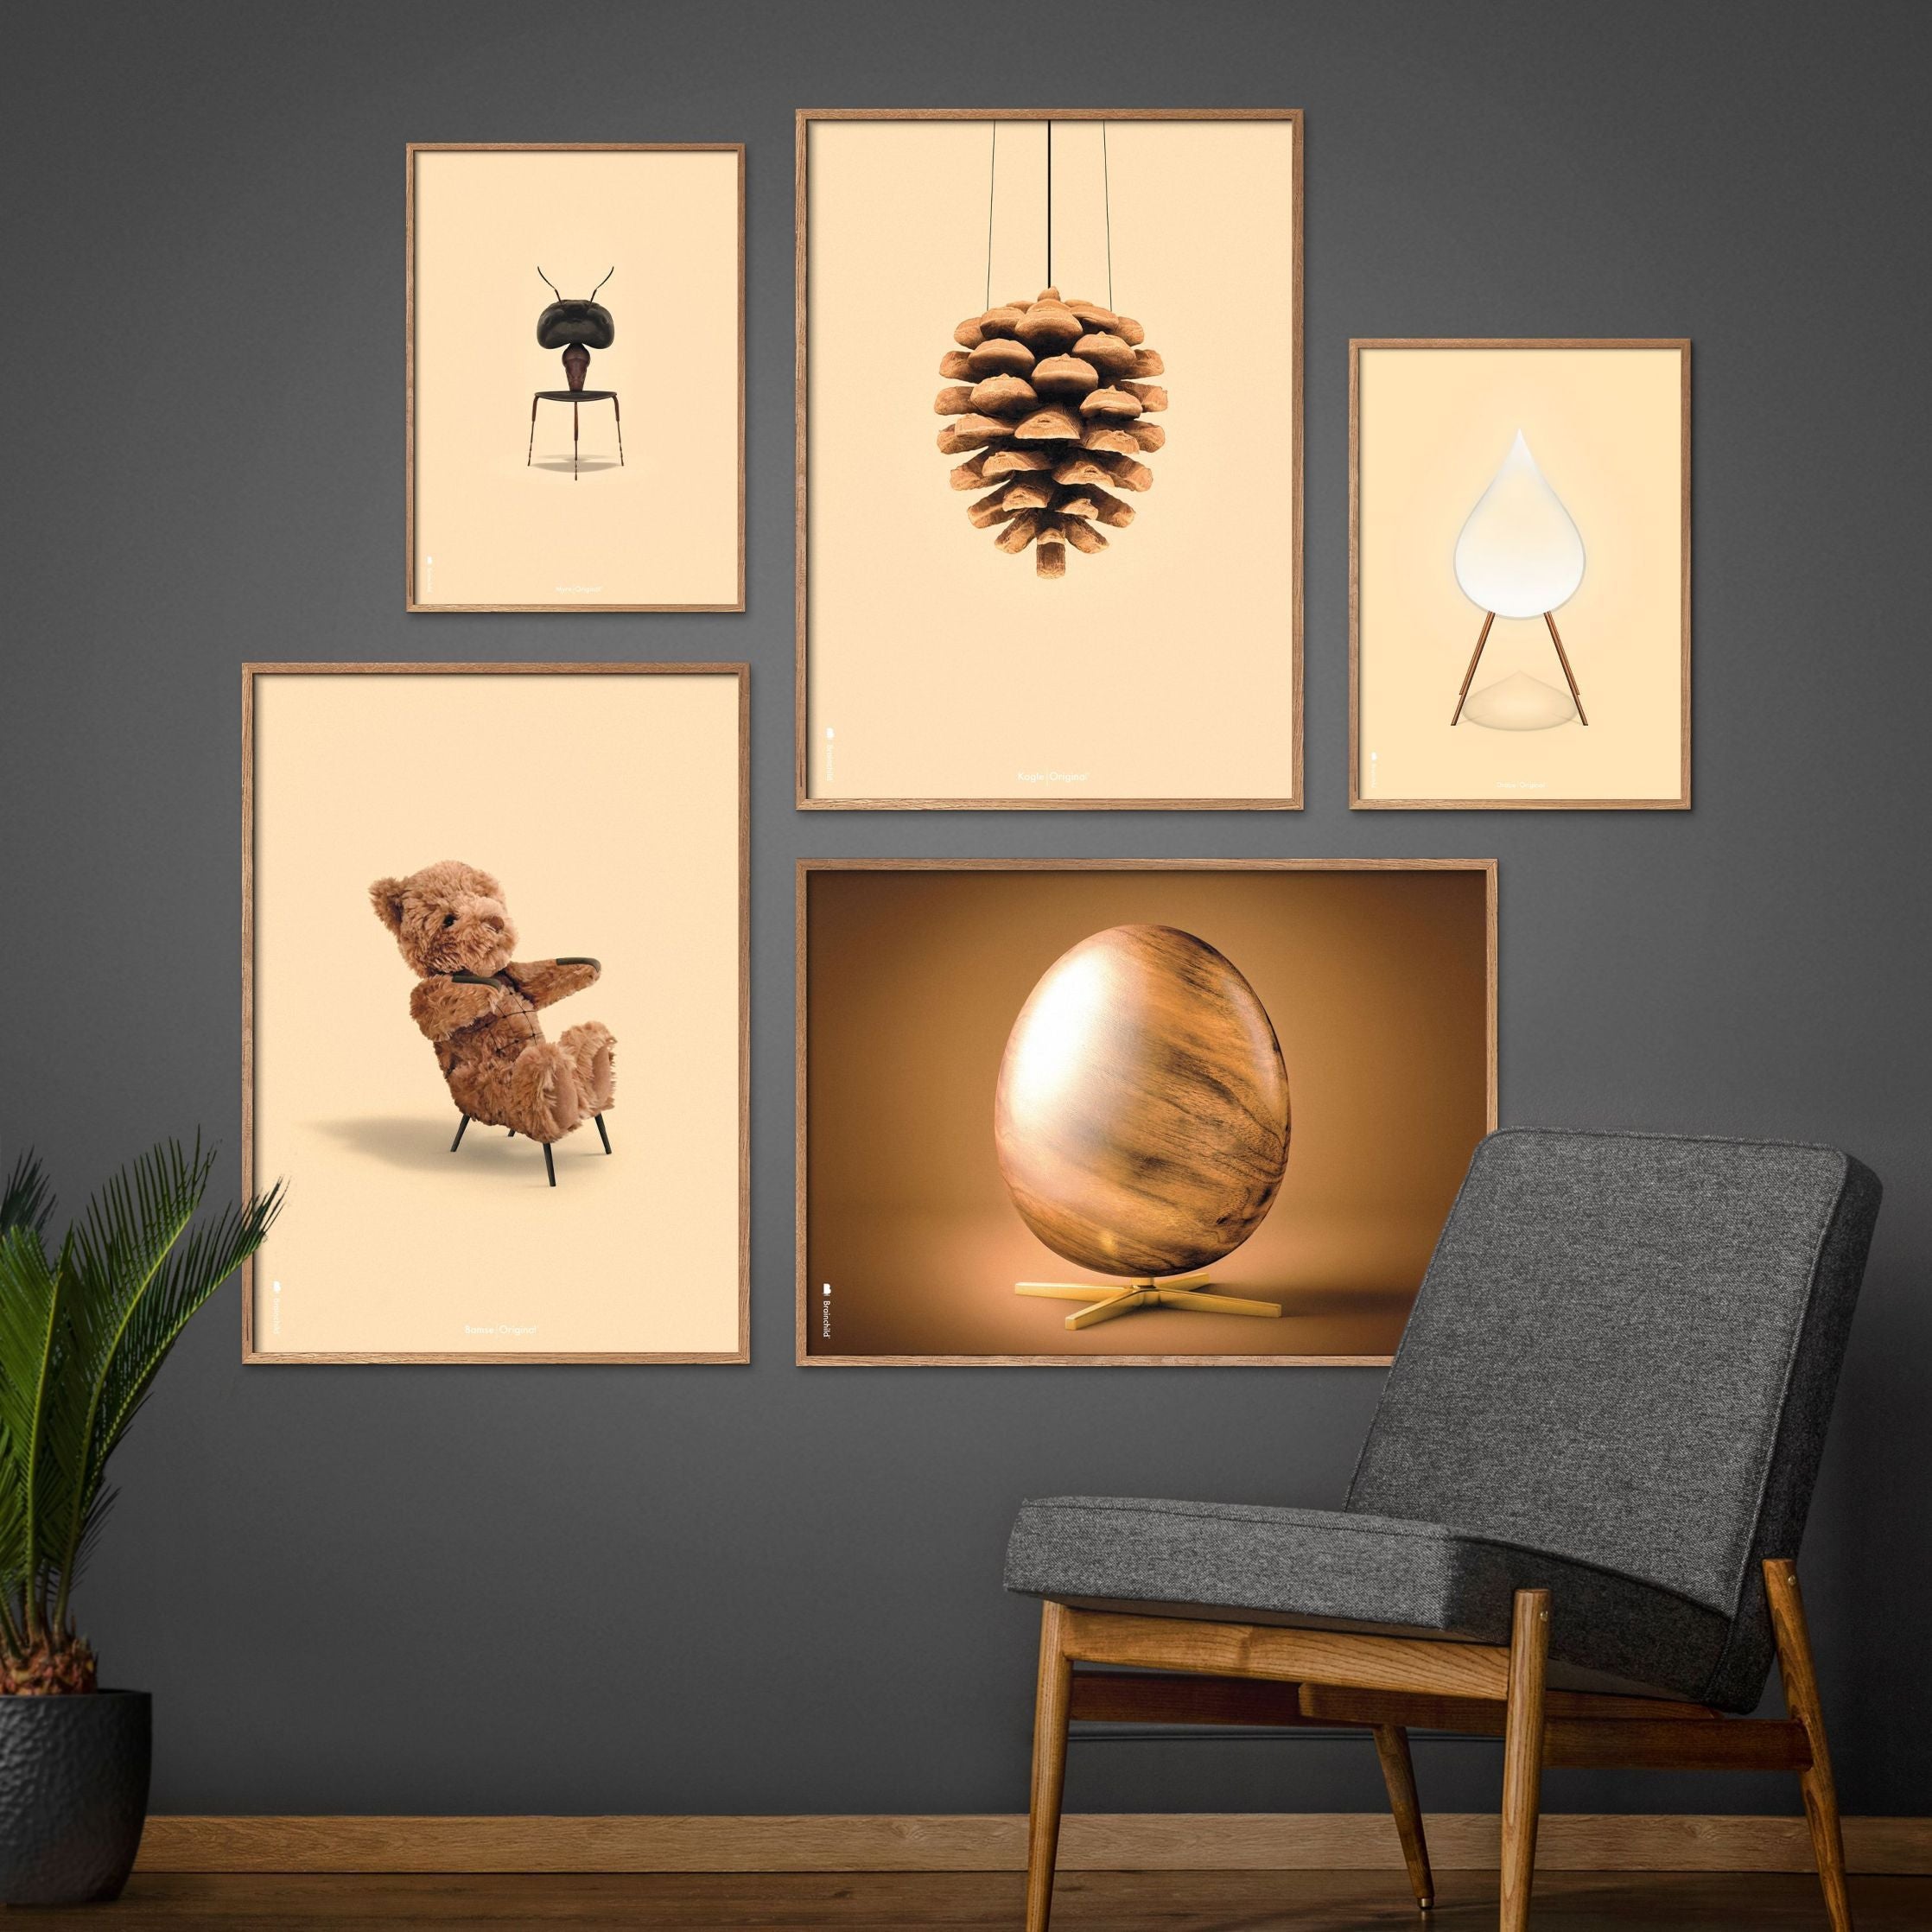 Brainchild Pine Cone Classic Poster, Frame Made Of Light Wood 30x40 Cm, Sand Colored Background